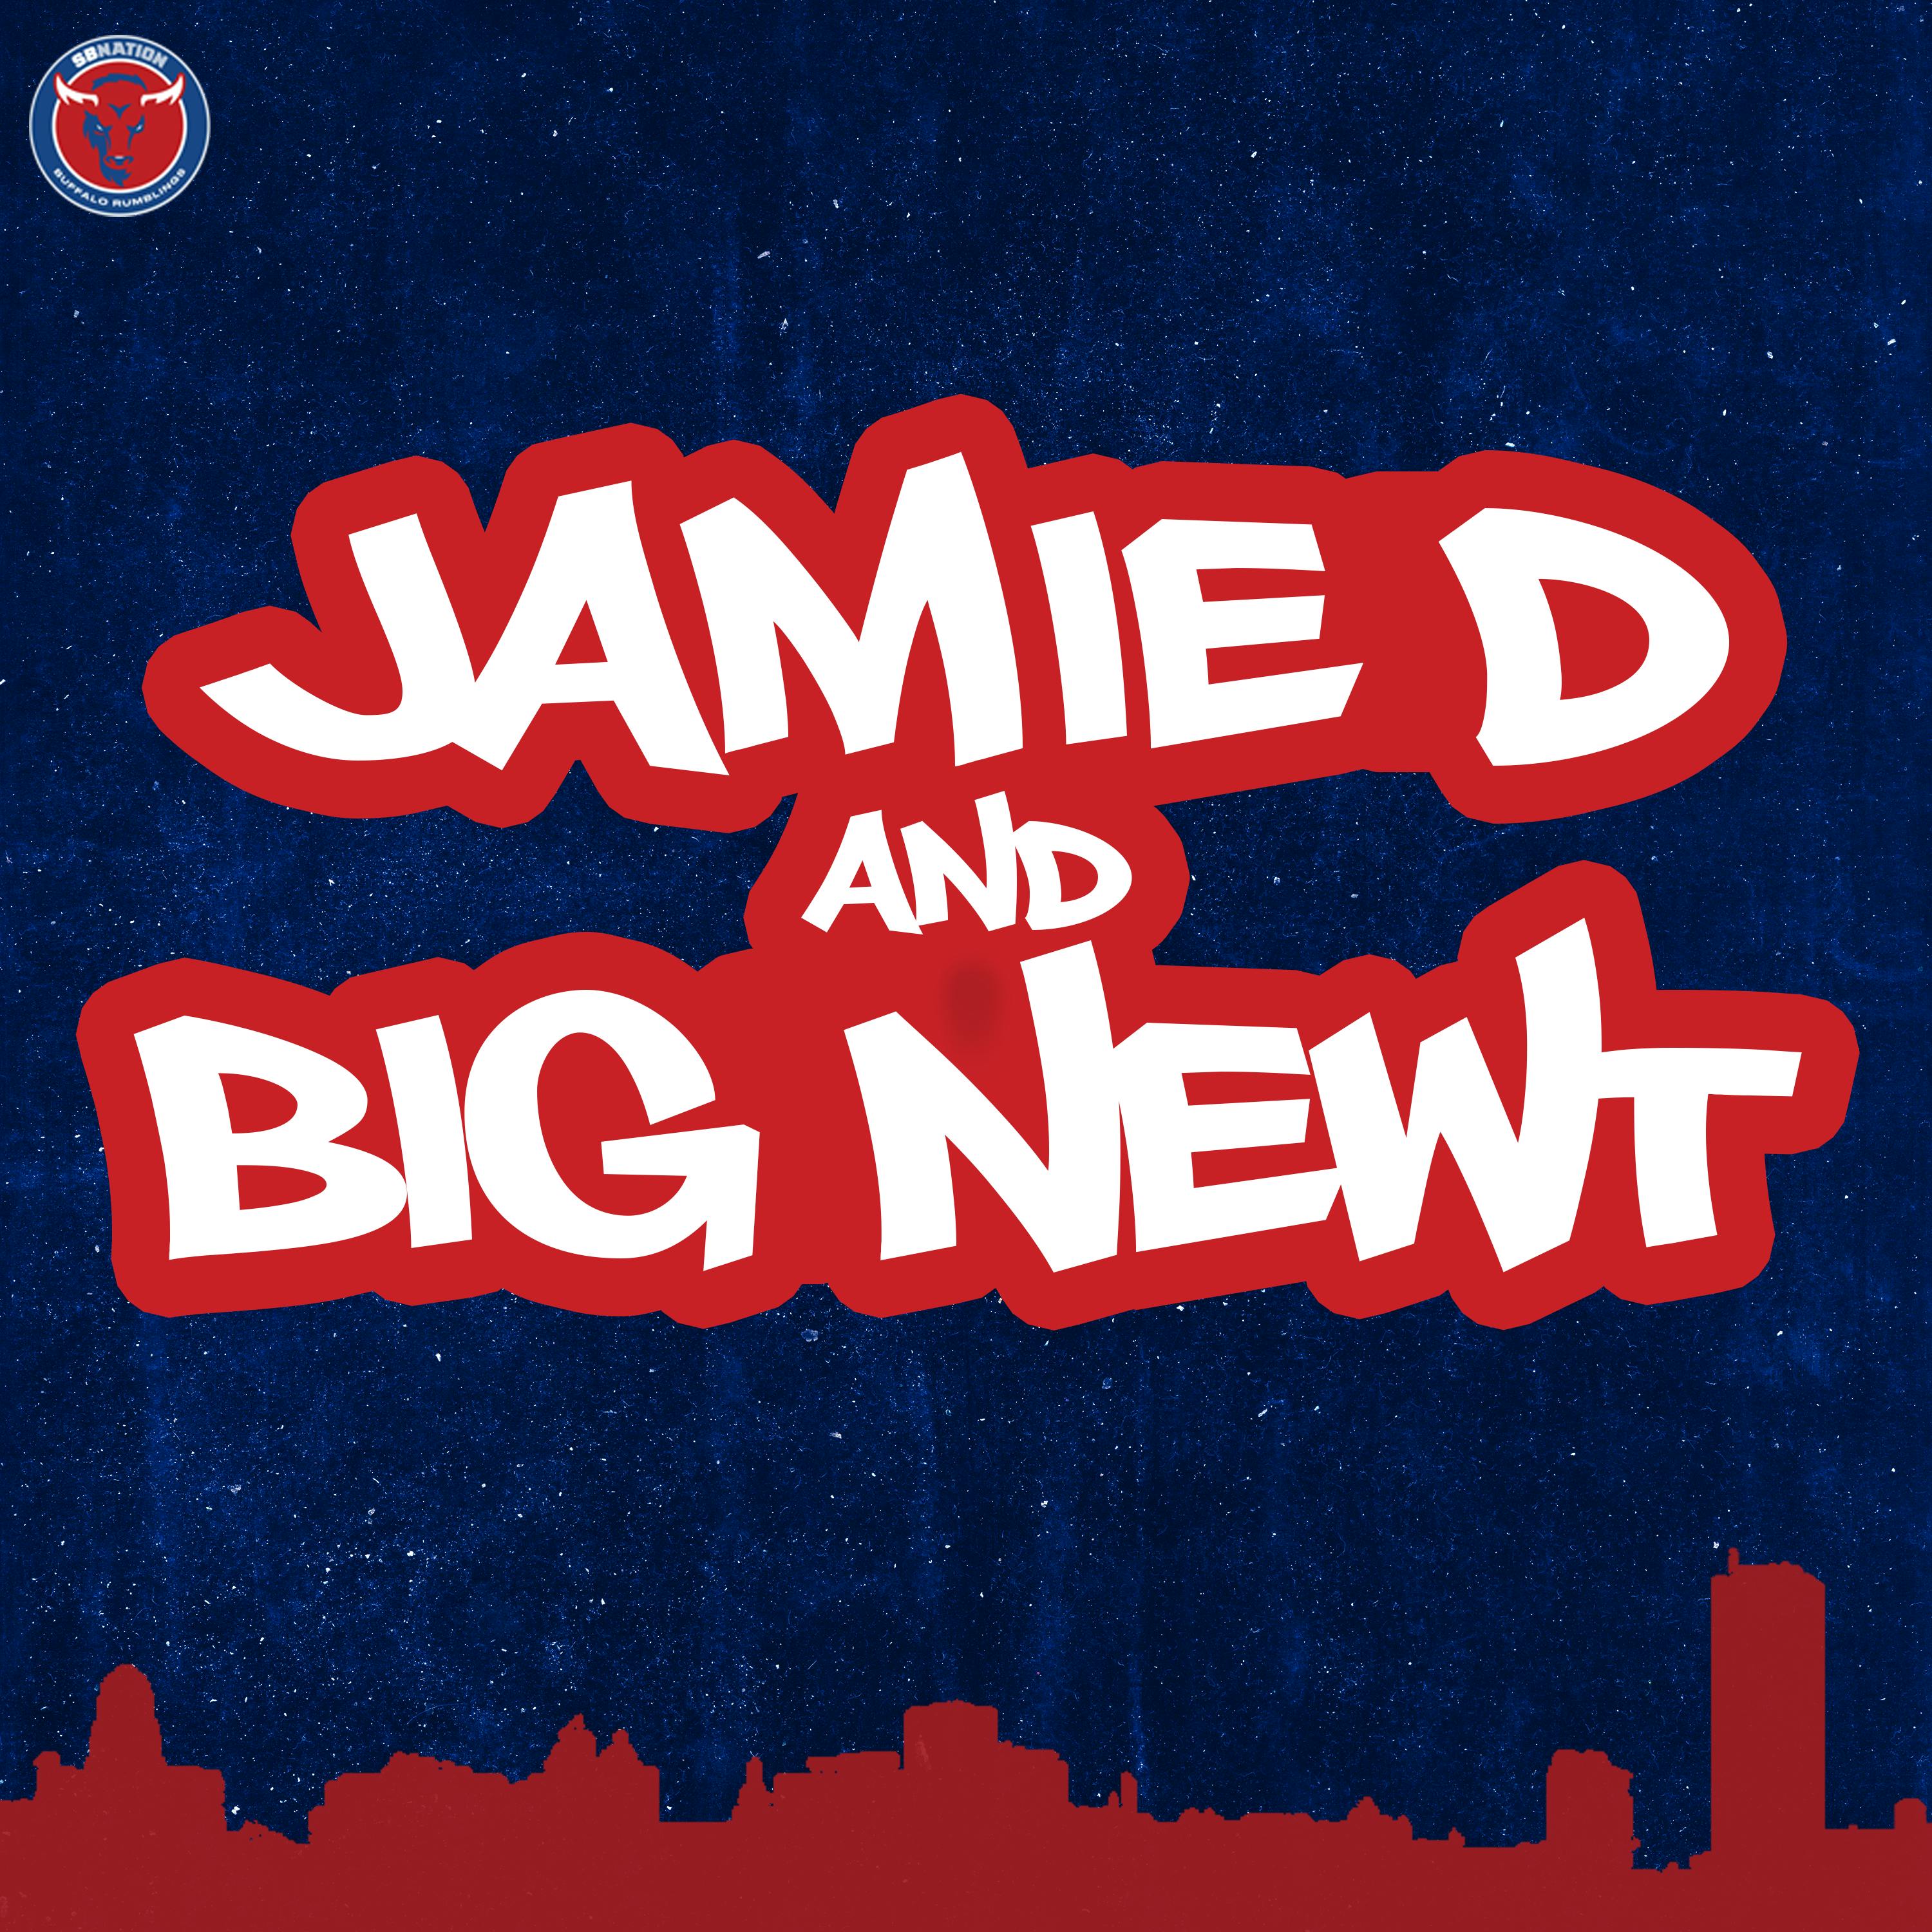 Jamie D and Big Newt: Don't worry, Bills fans